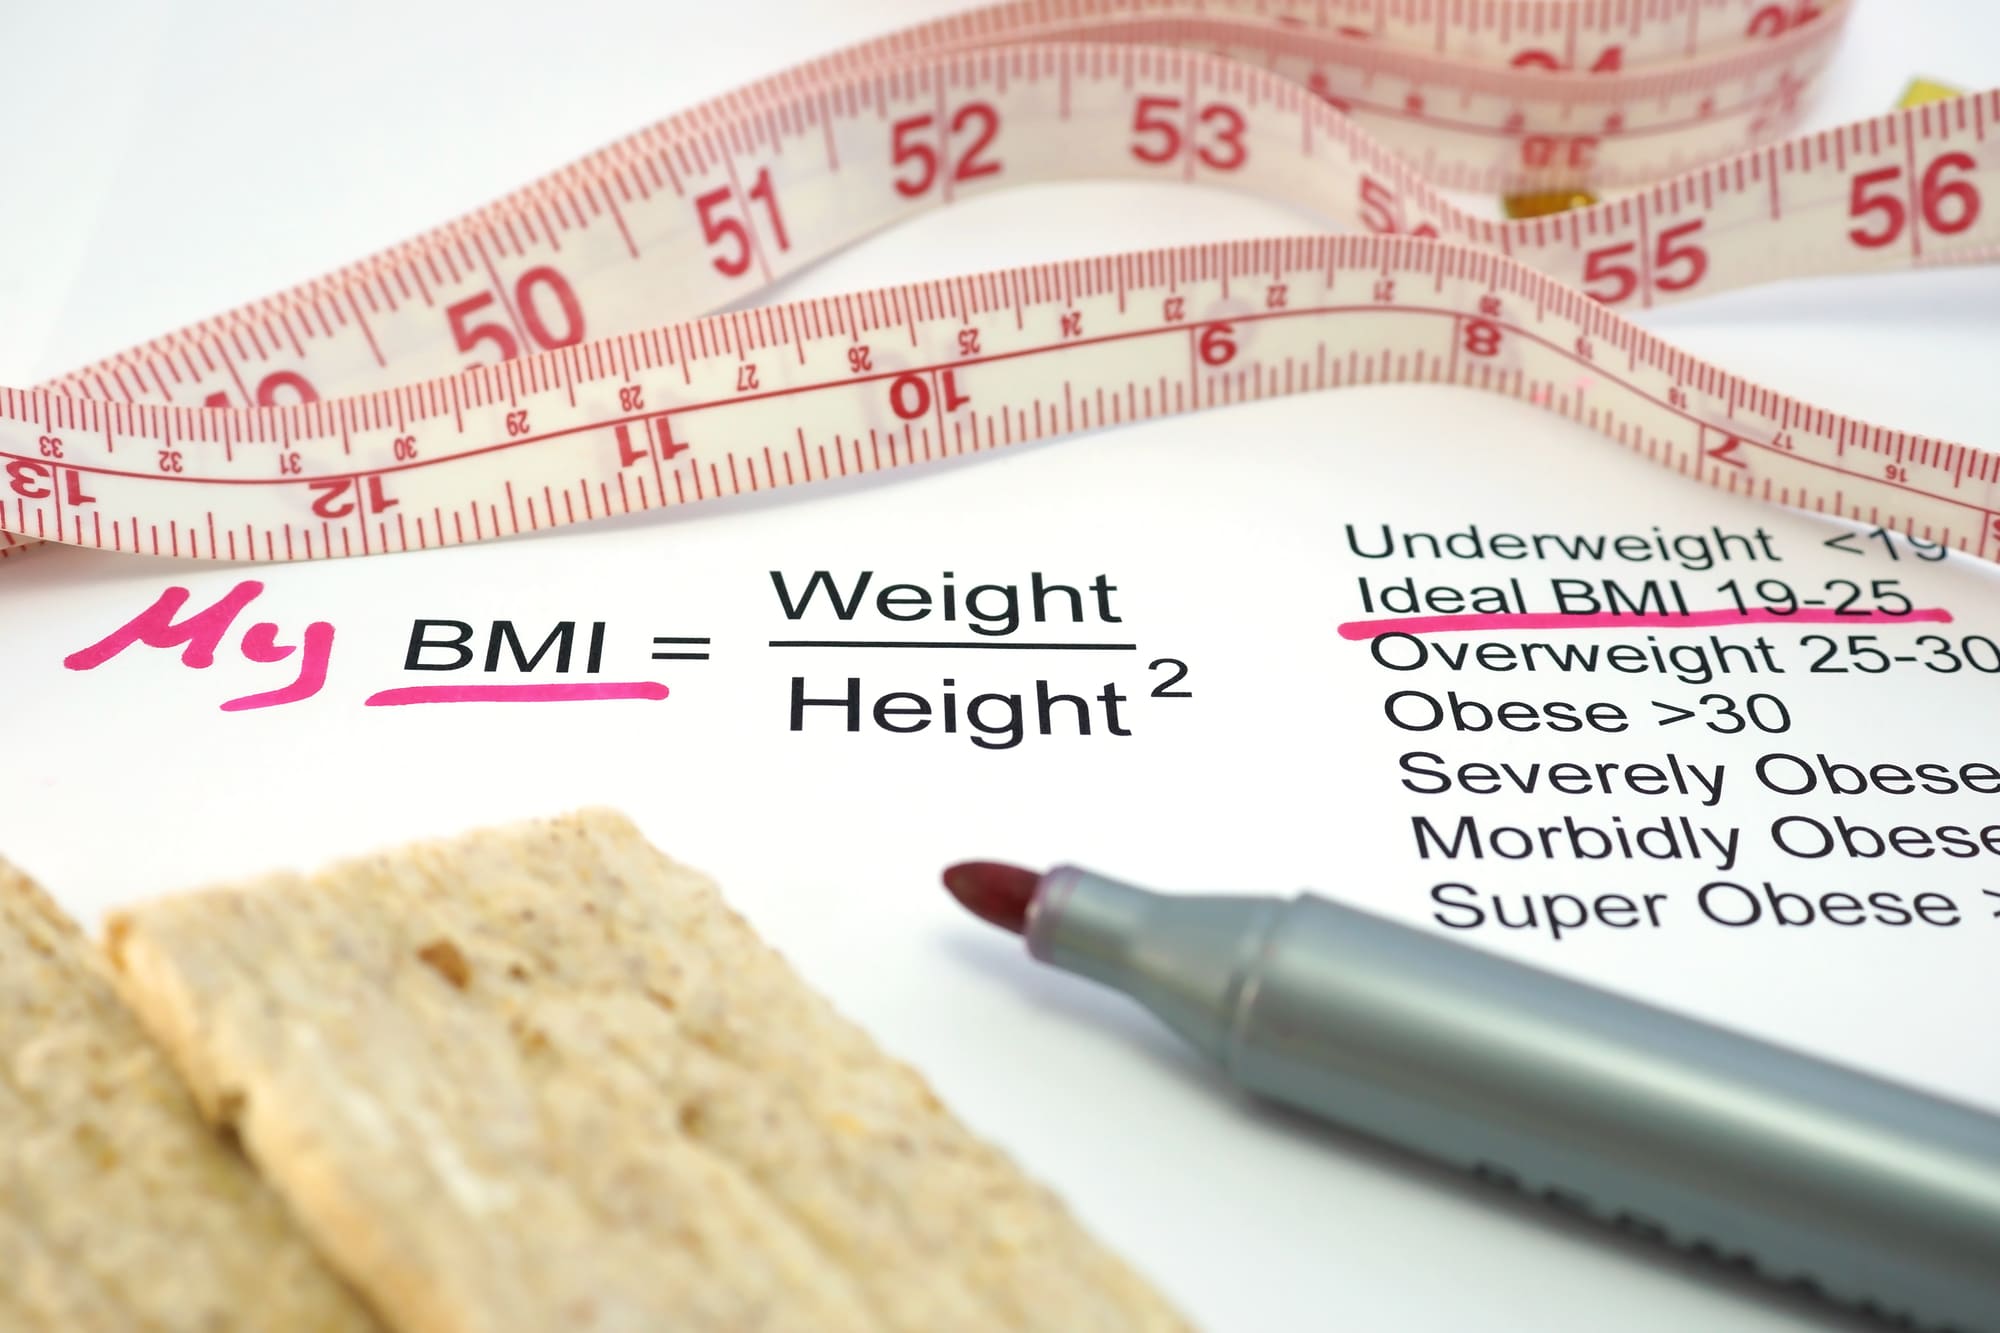 Why are your weight and BMI important for clinical trials?